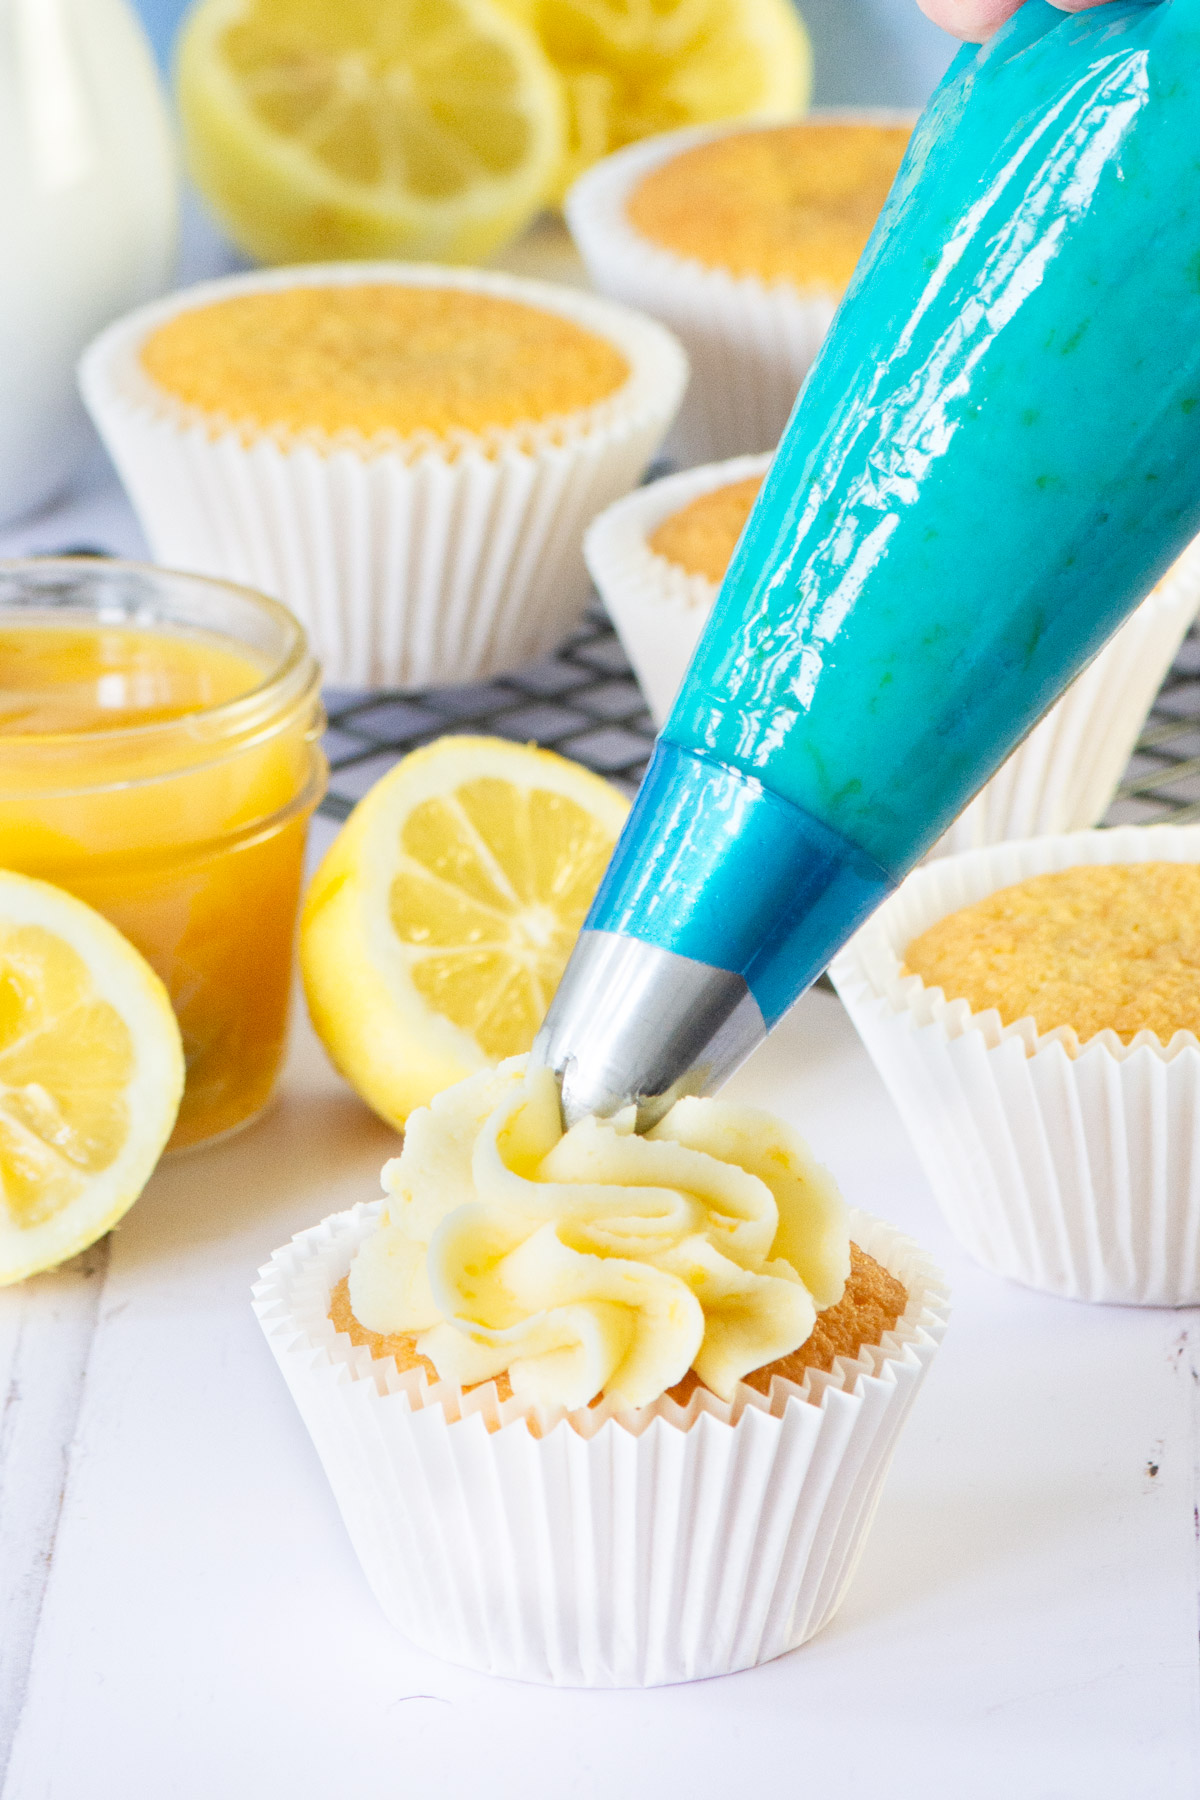 Two different versions of my delicious lemon buttercream - one made with fresh lemons (juice and zest) and another made with either lemon extract or oil. Perfect for decorating cakes and cupcakes or filling biscuits and macarons.